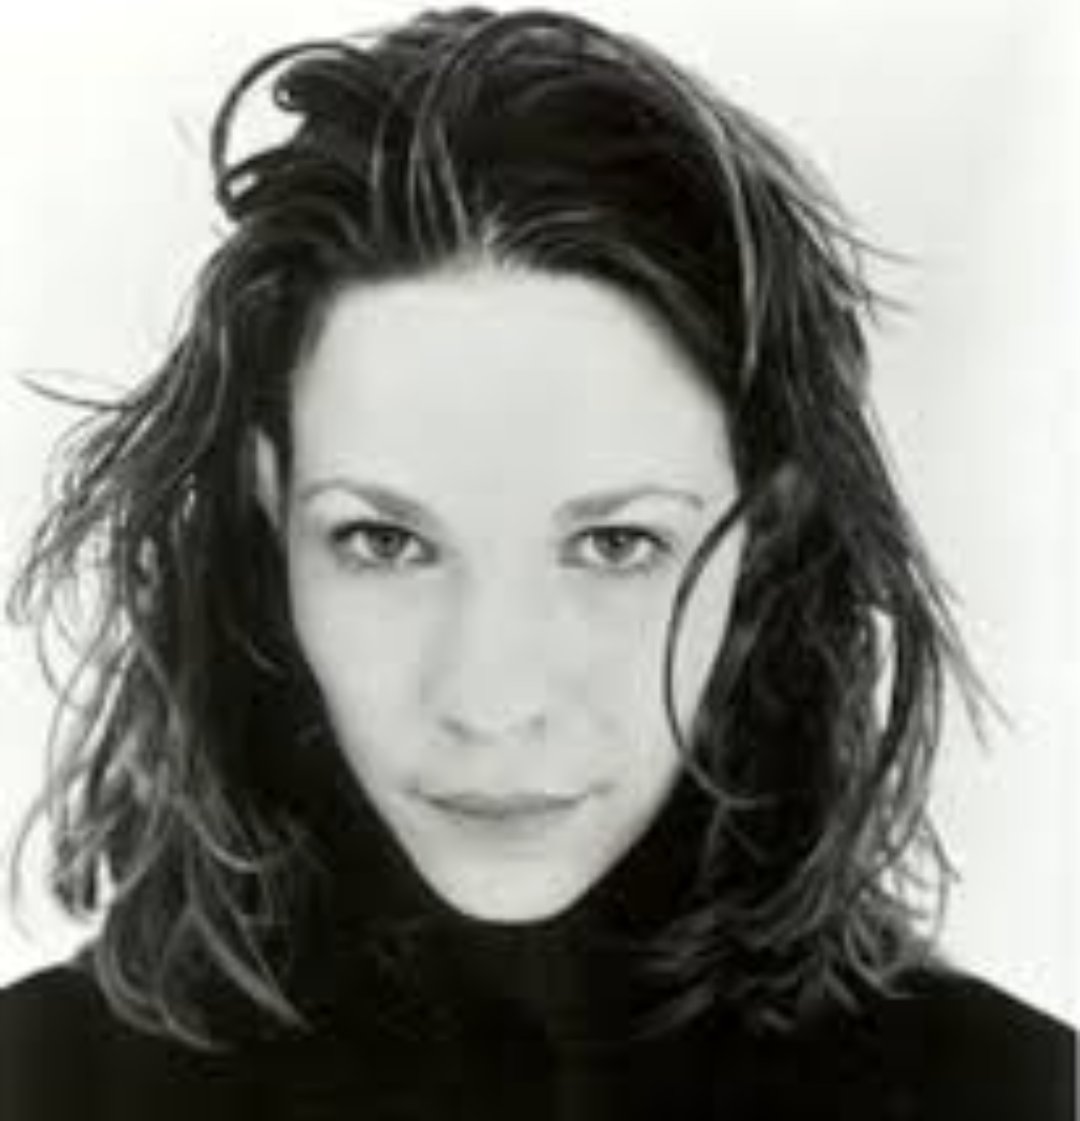 Every. Time. @lilitaylor